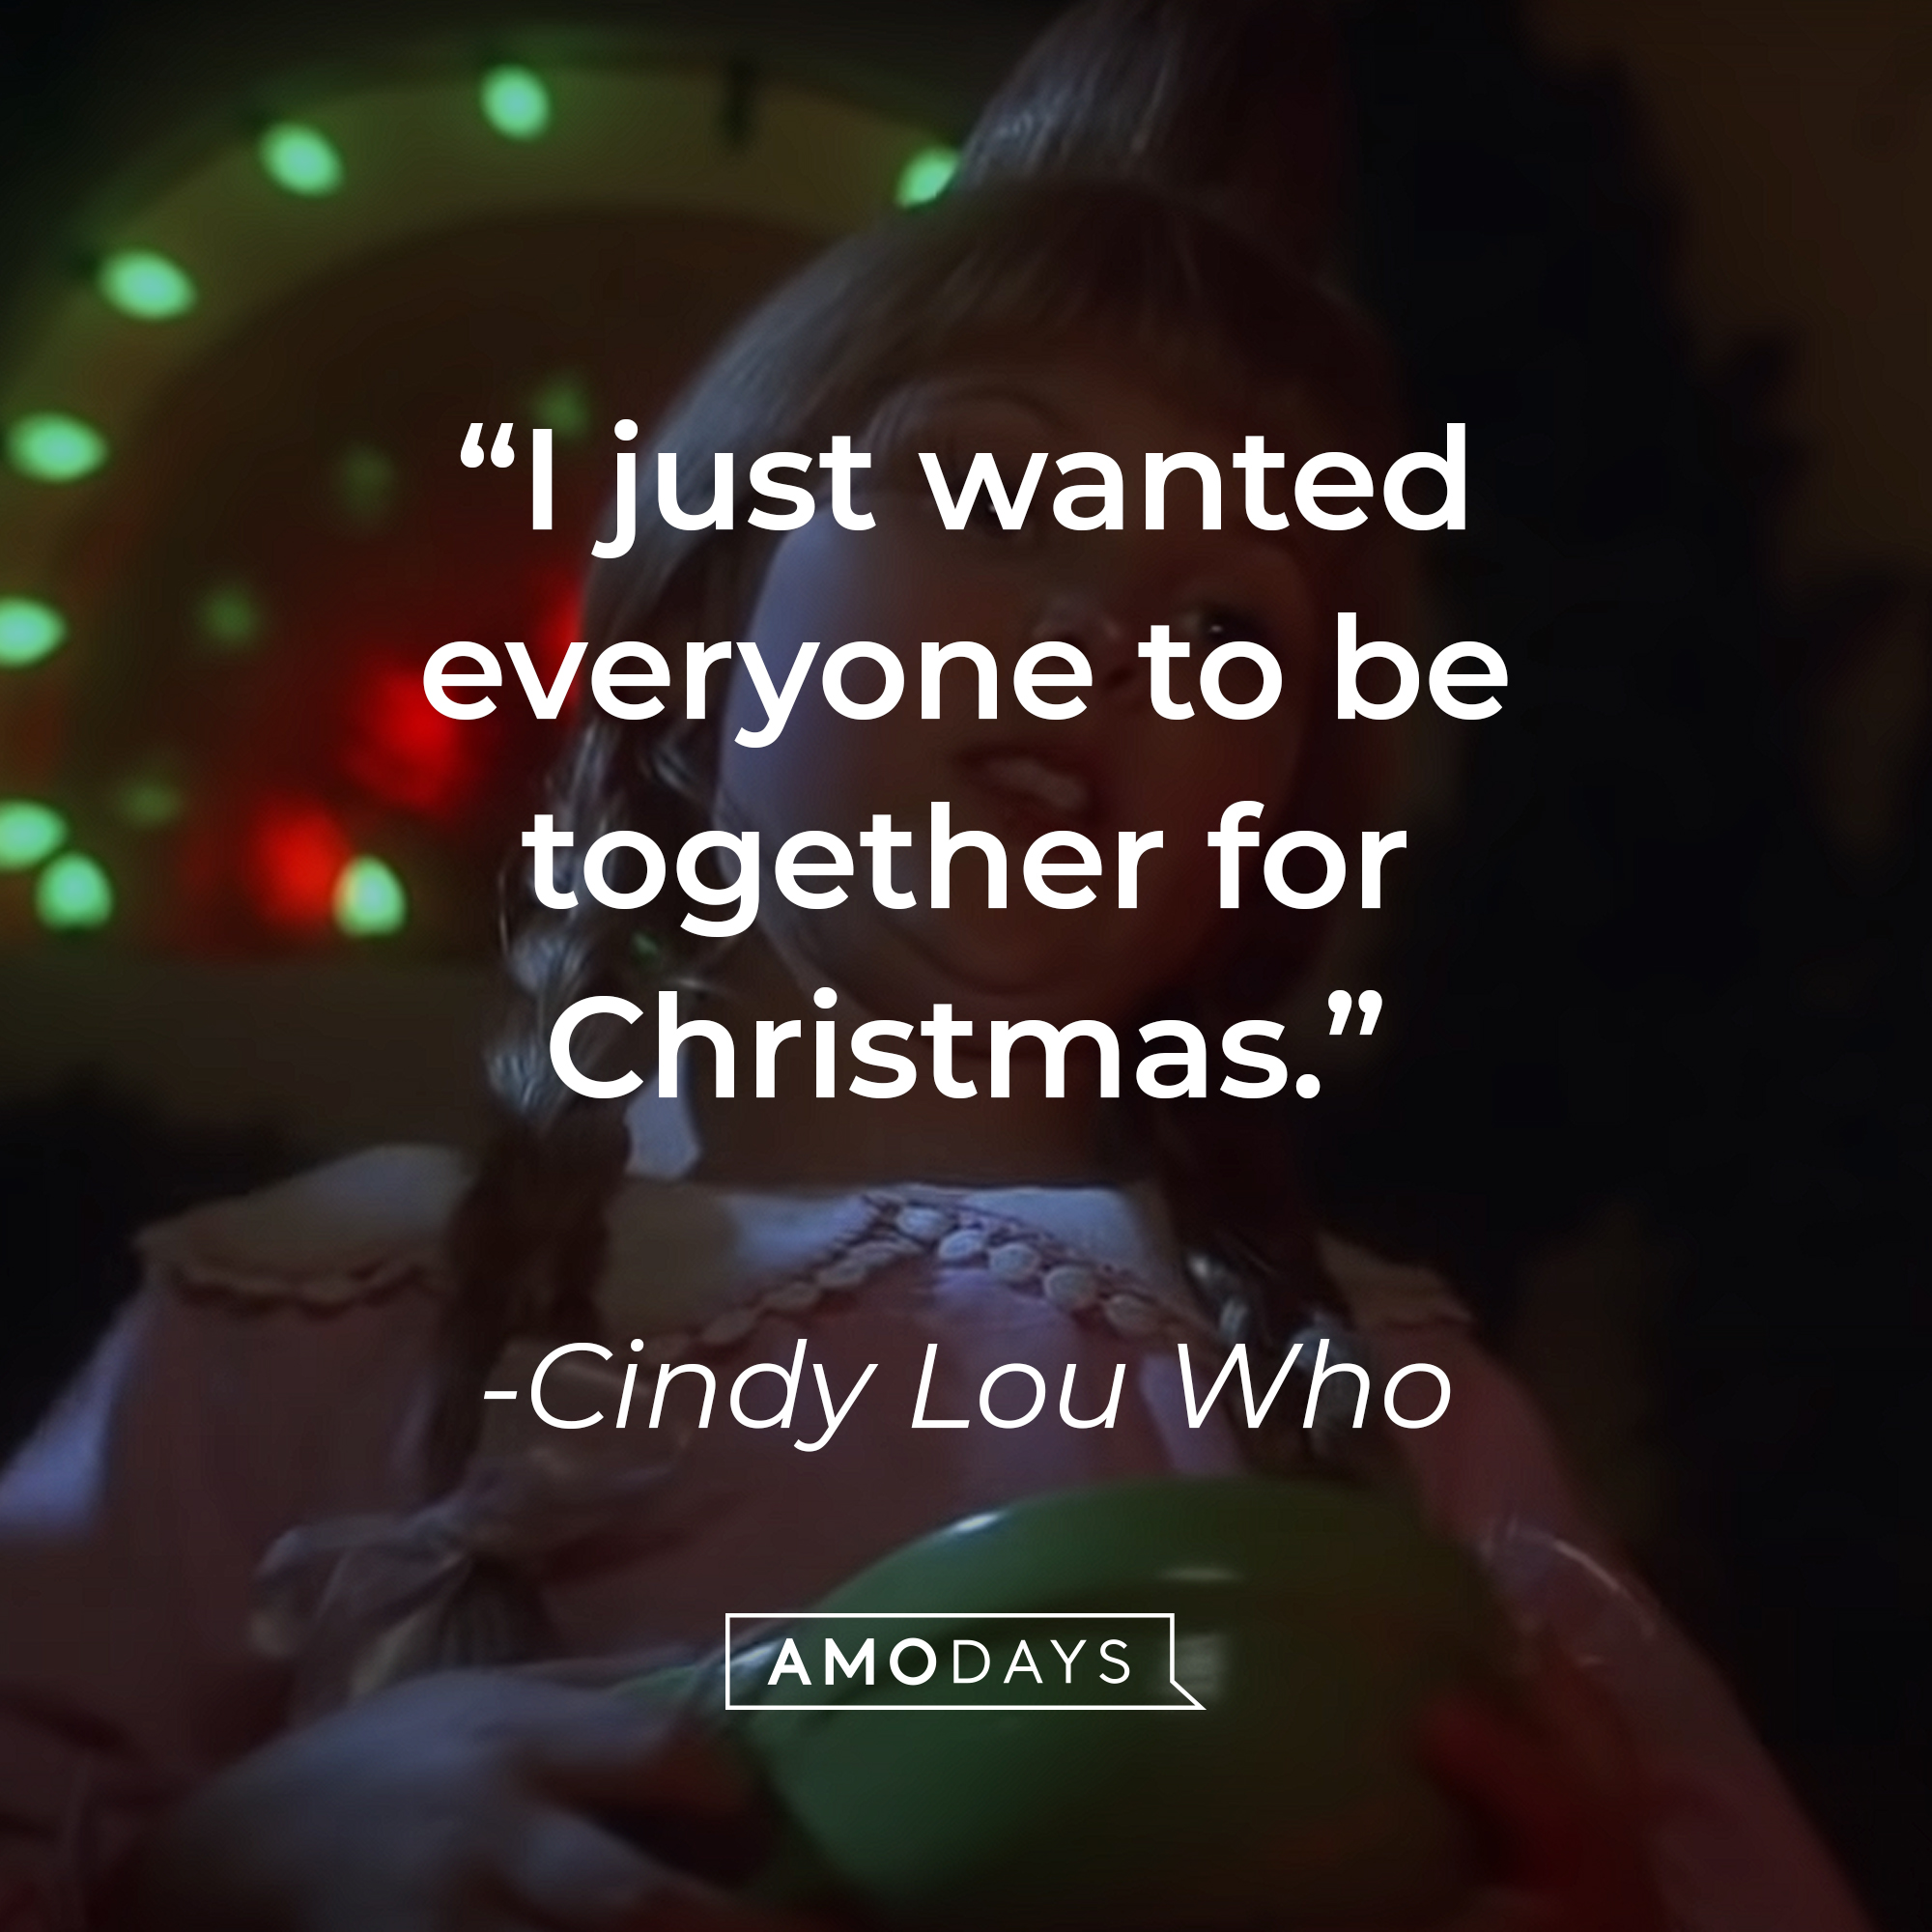 Cindy Lou Who, with her quote: "I just wanted everyone to be together for Christmas." | Source: Youtube.com/UniversalPictures